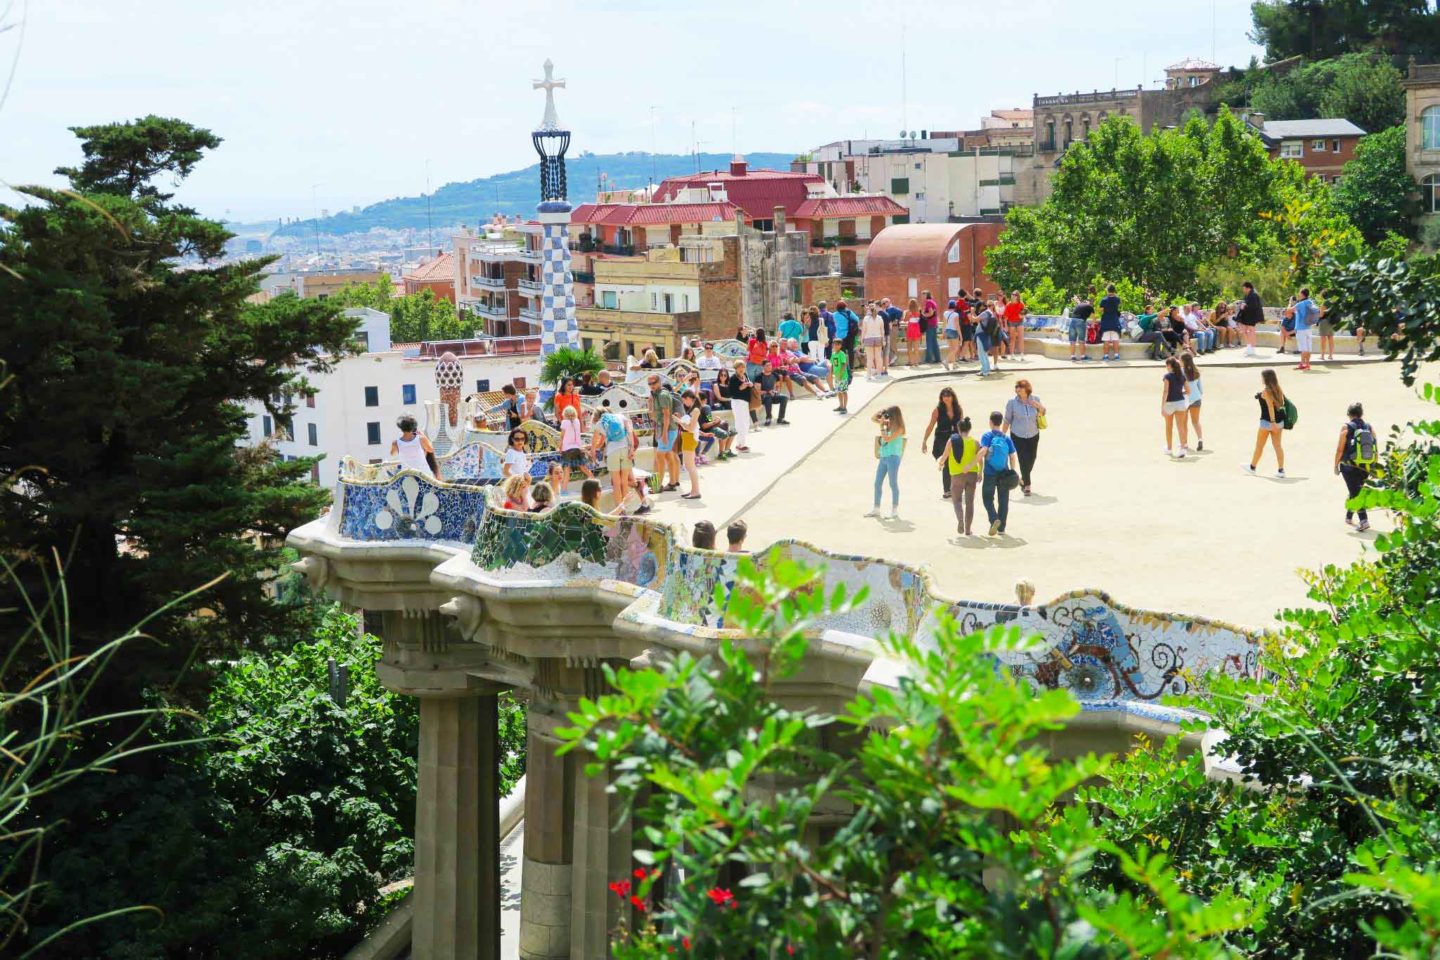 park guell, gaudi architecture in Barcelona, Spain